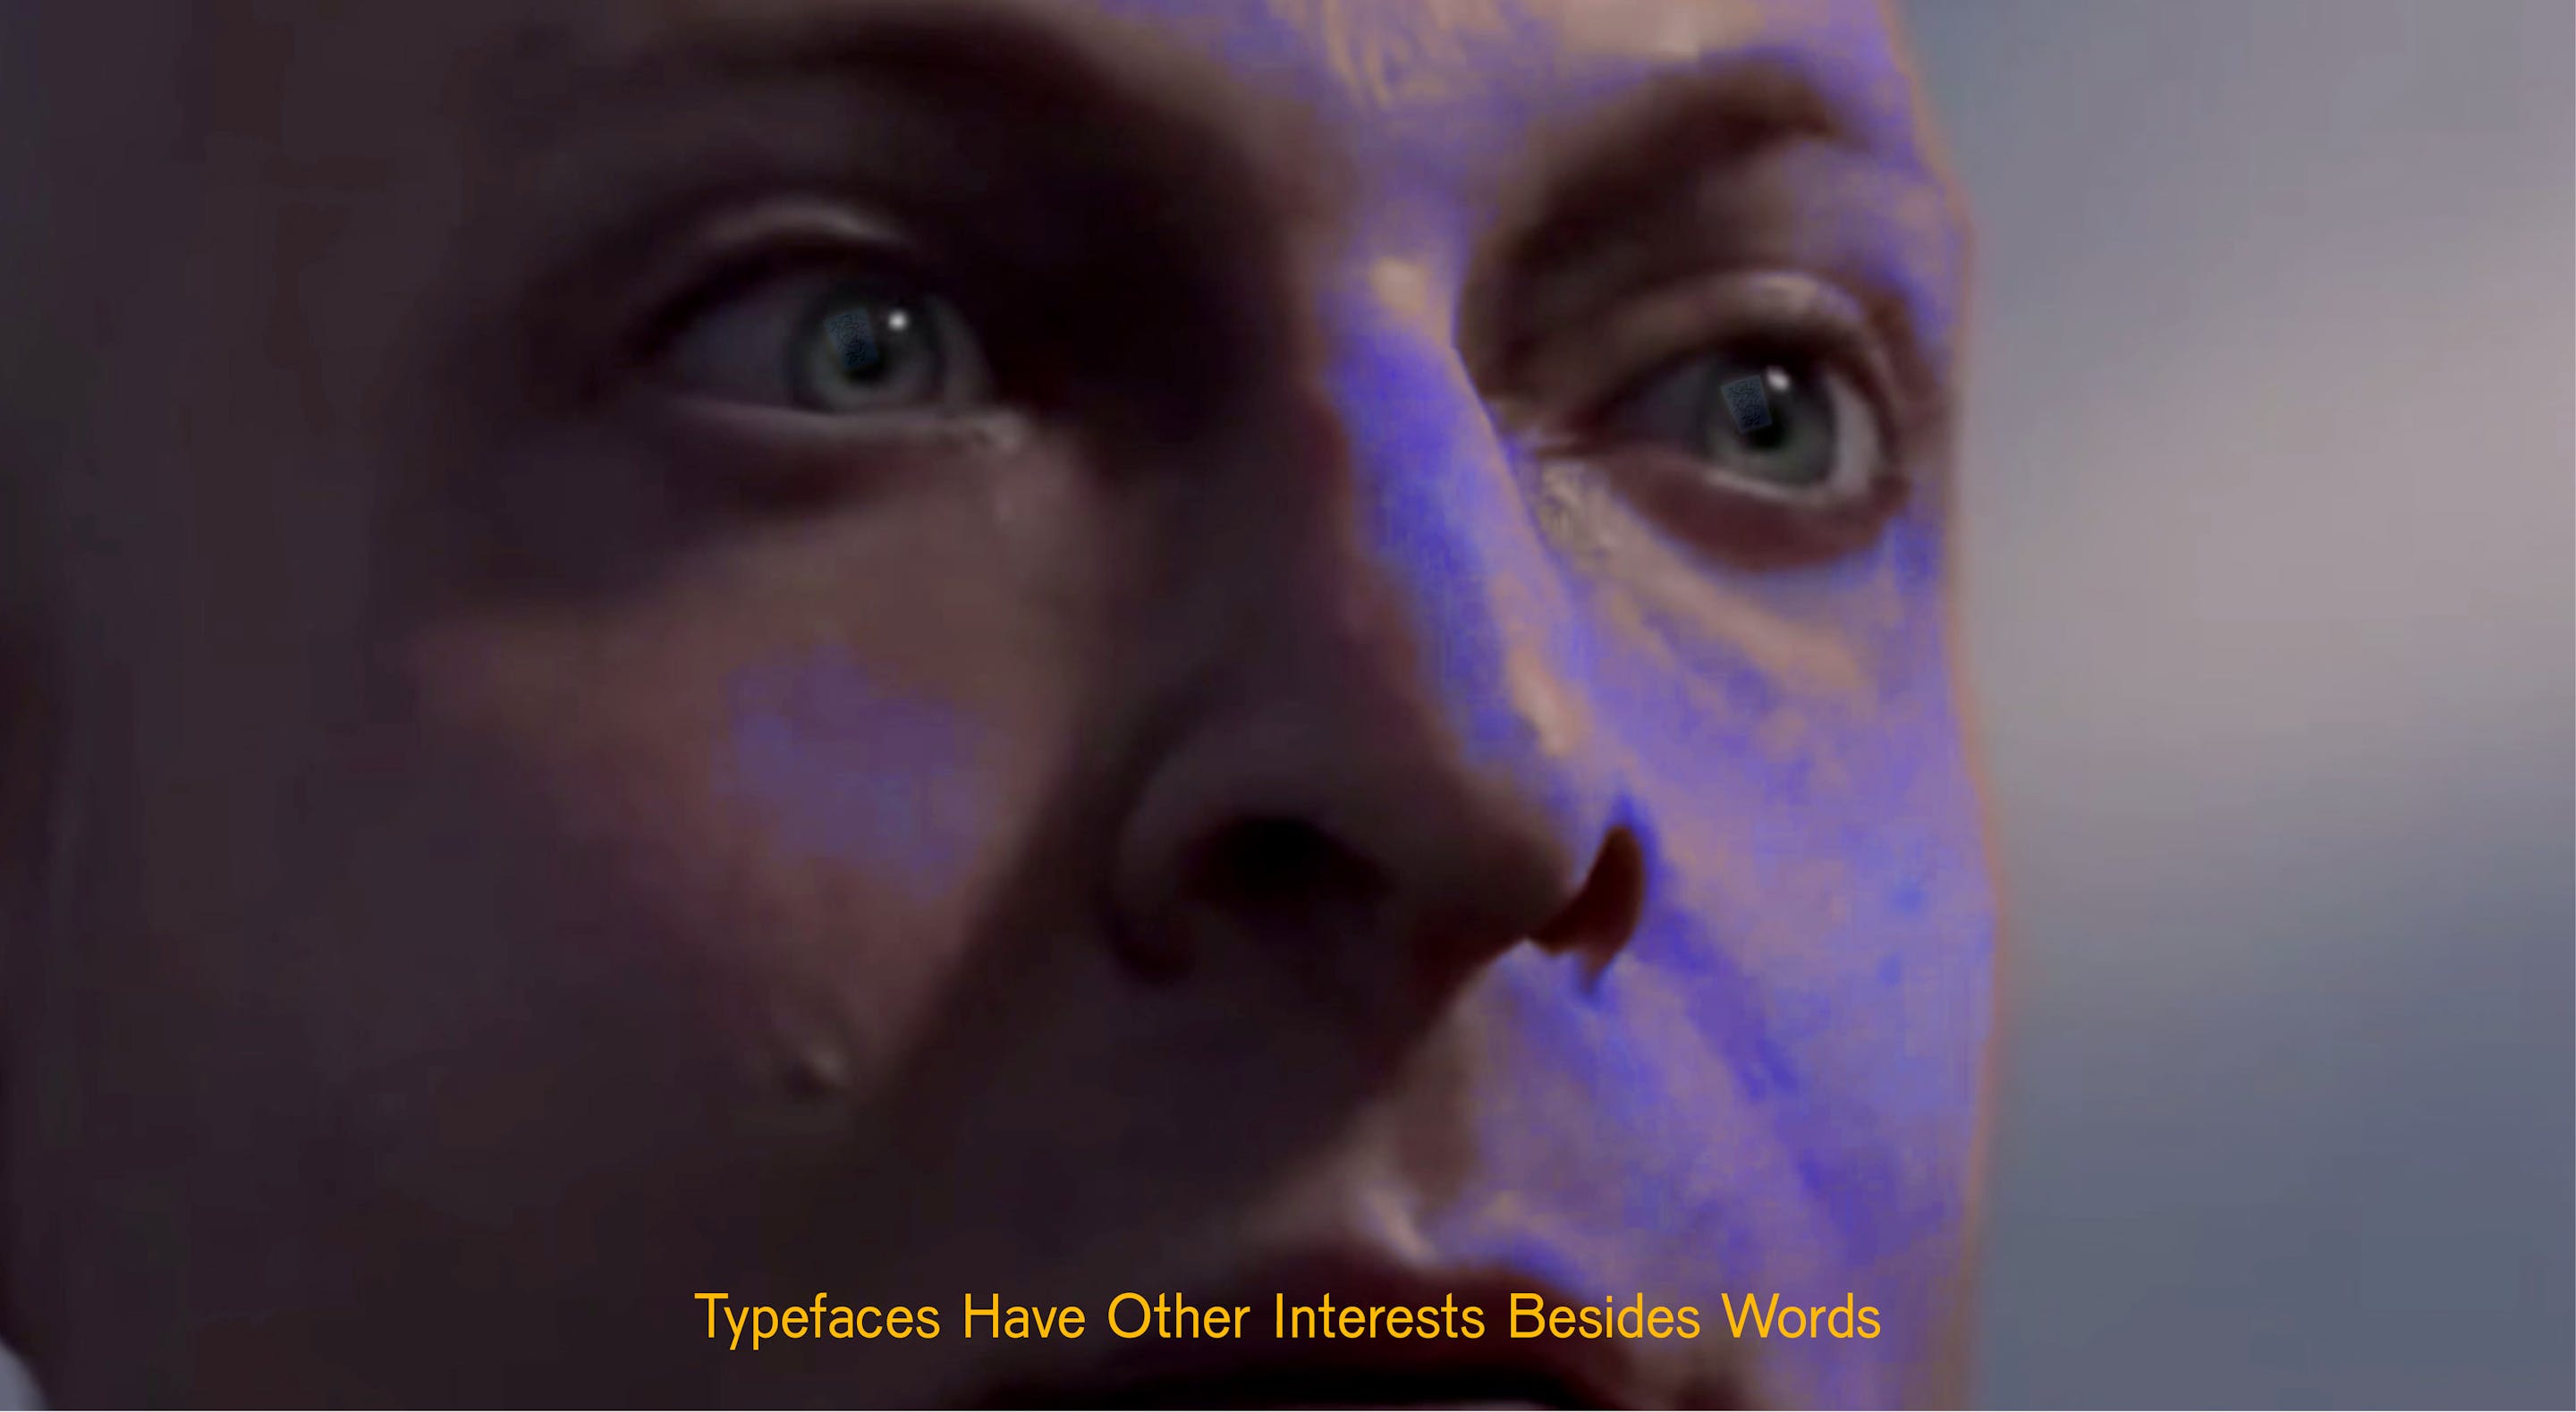 Jangli Rep Xxx Video - The Emotional Life of Typefaces: An Interview with J-LTF